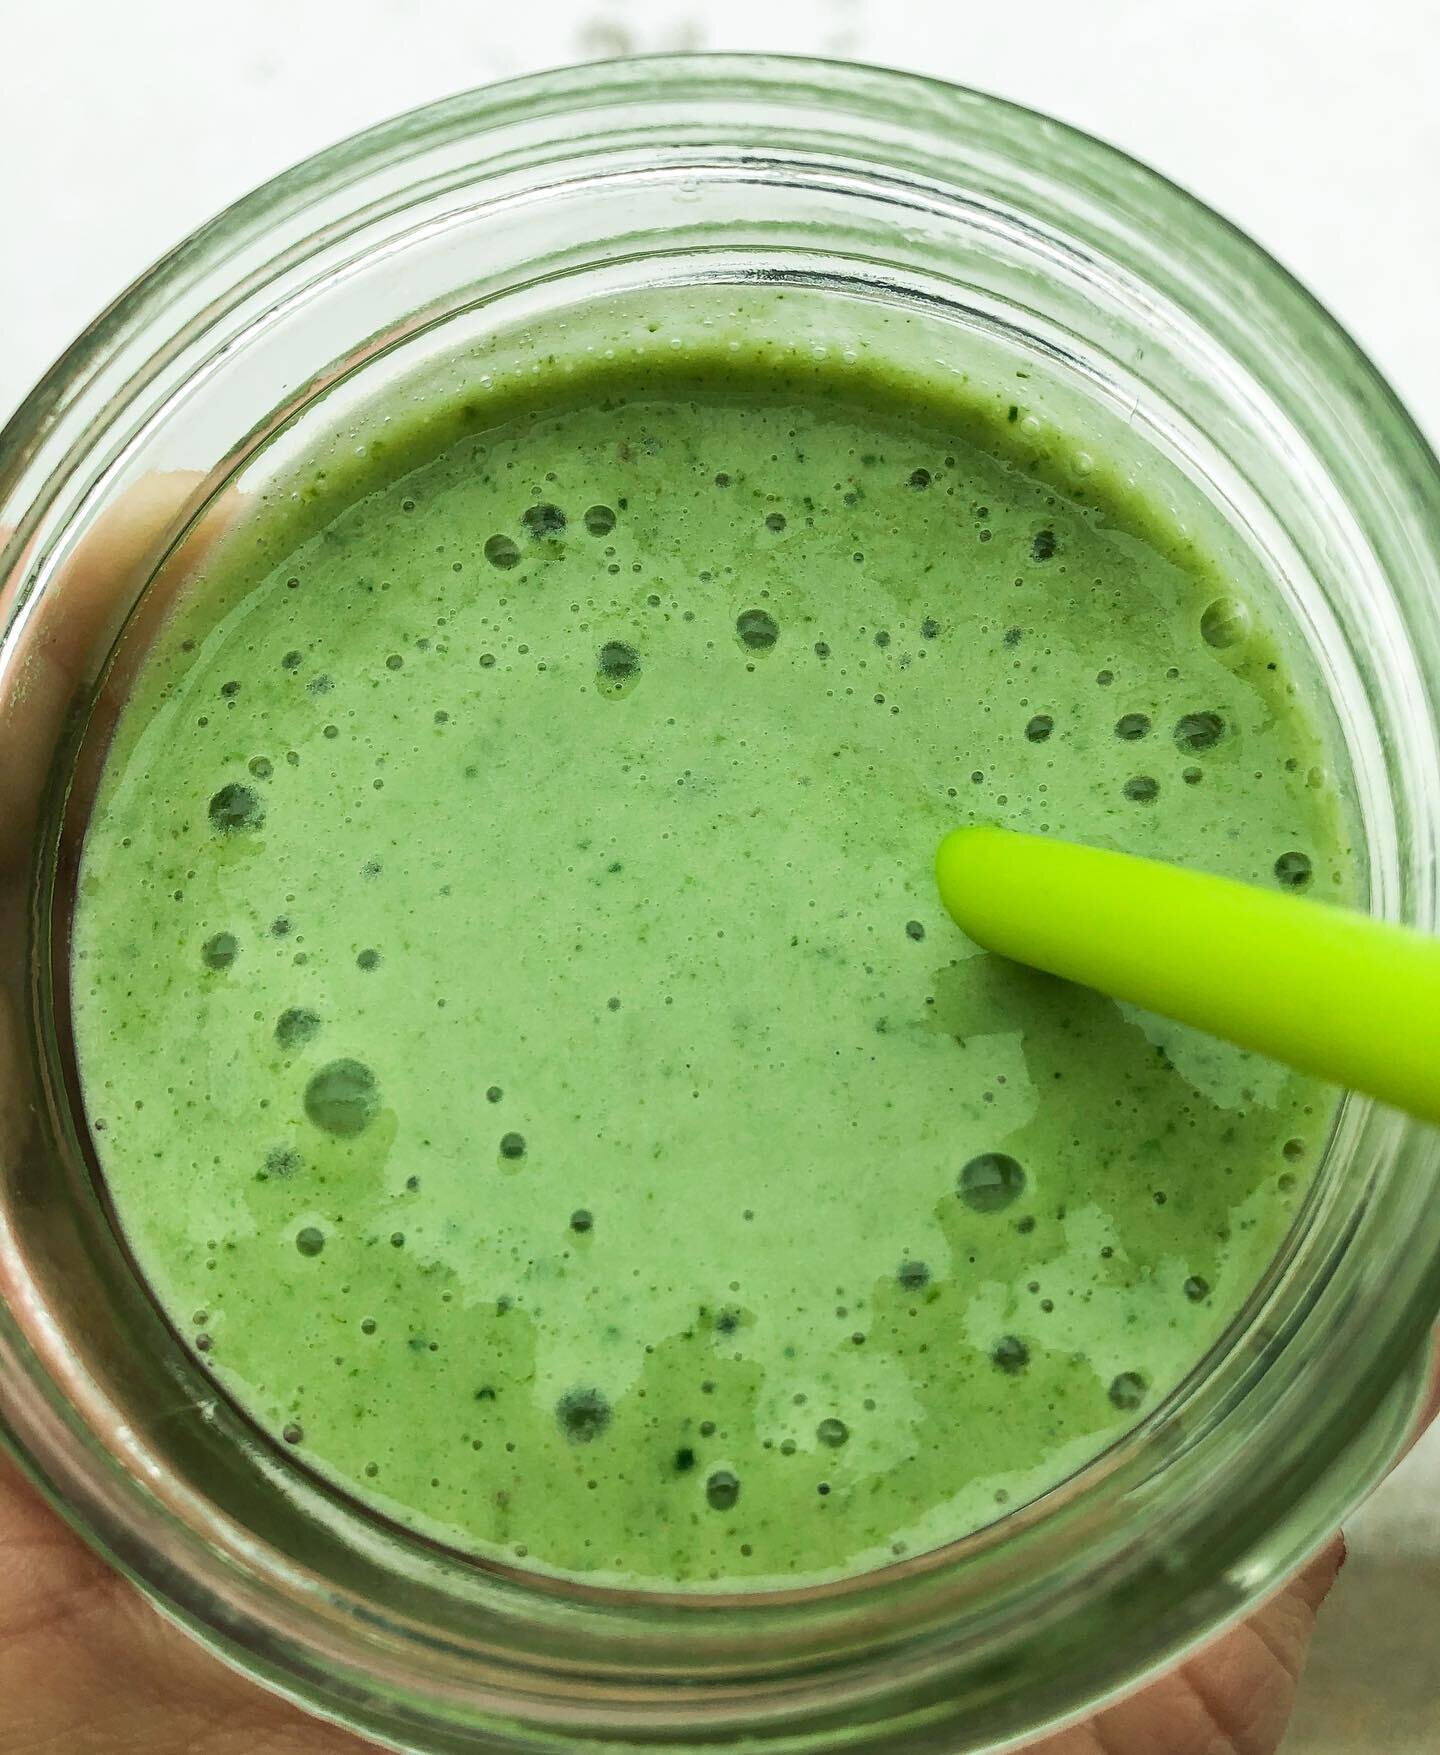 Tropical Green Smoothie🌴SAVE this recipe for later, details below!

Ingredients:
1 frozen banana (cut-up)
1 cup almond milk
1/4 cup frozen mango
1/4 cup frozen pineapple
1 handful chopped kale
1 handful chopped spinach

Blend in layers for best colo